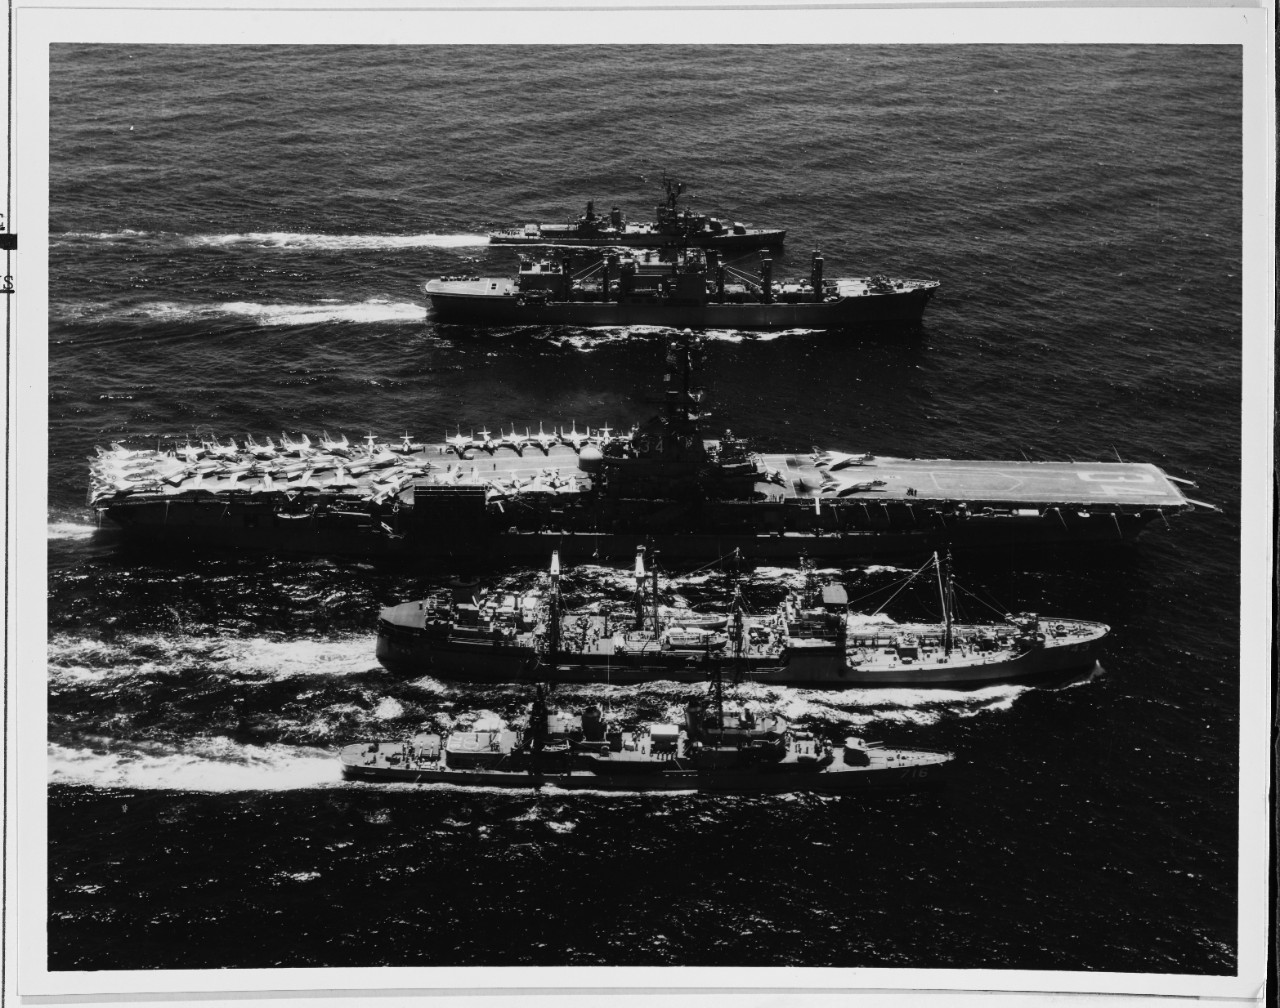 Photo #: USN 1139357  Seventh Fleet ships replenishing in the South China Sea, May 1969